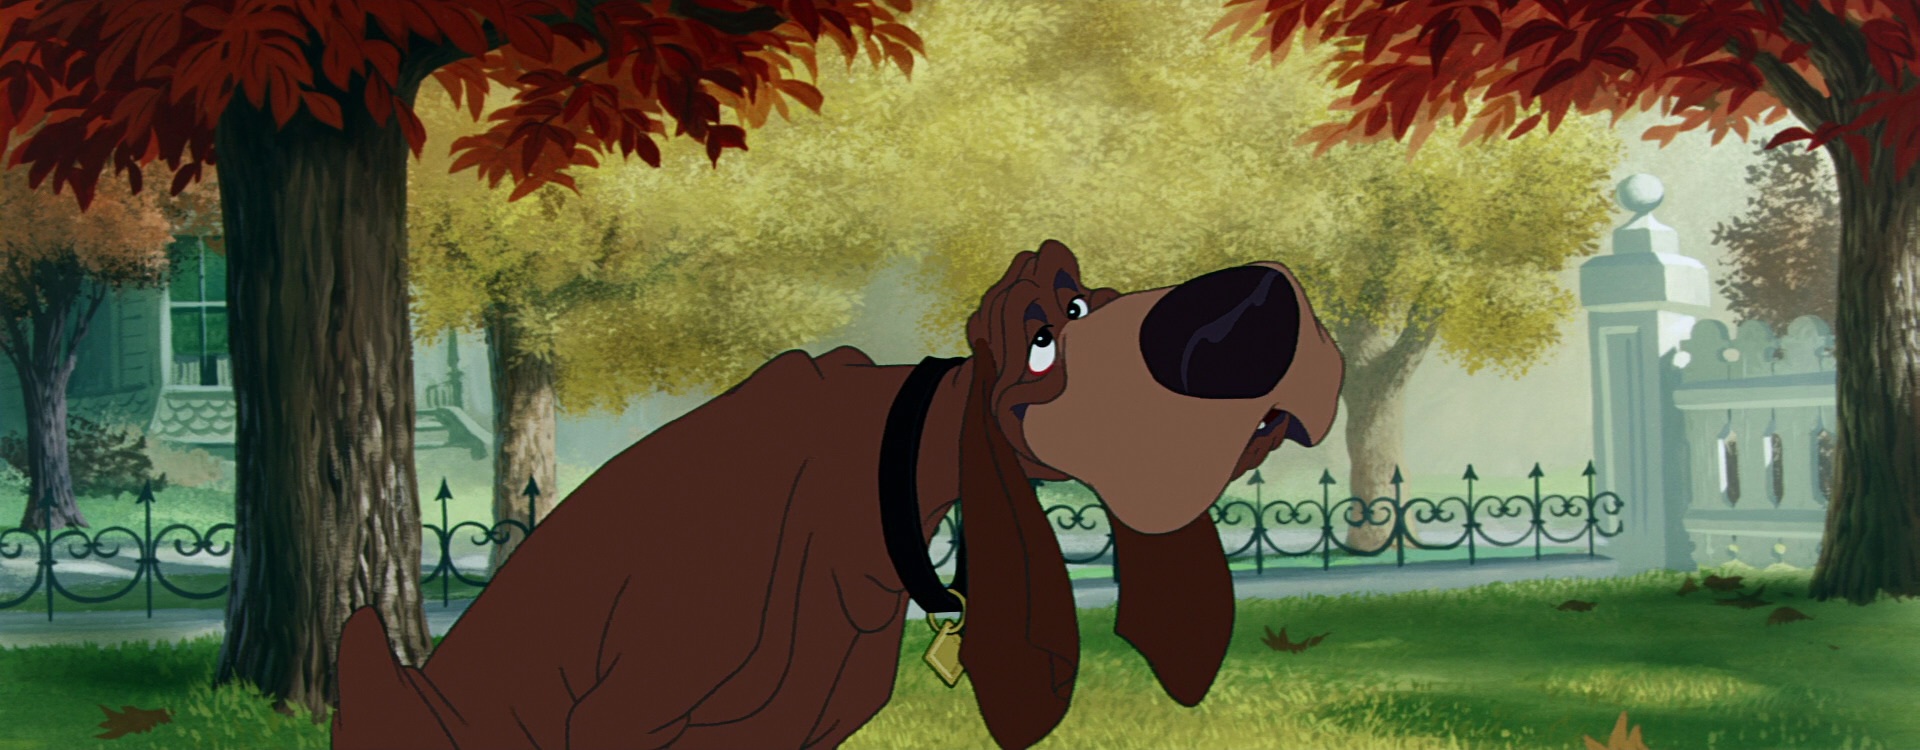 Image result for TRUSTY LADY AND THE TRAMP GIFS